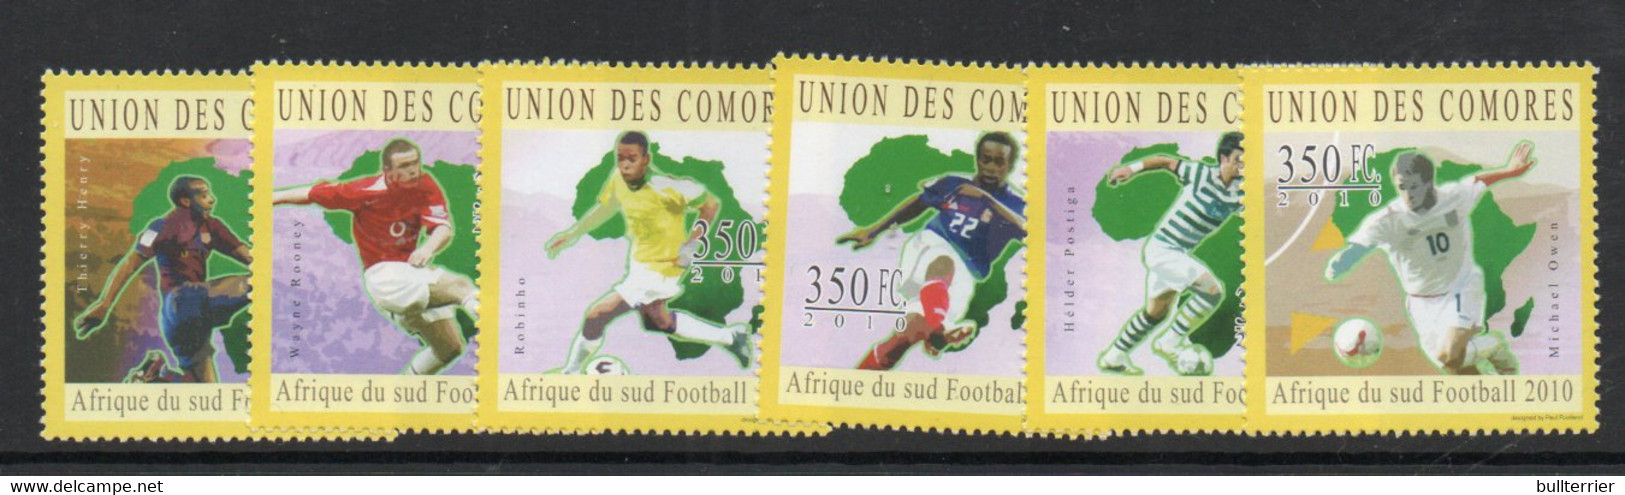 SOCCER - COMOROS - 2010 - SOUTH AFRICA WORLD CUP  SET  OF 4  MINT NEVER HINGED - 2010 – Zuid-Afrika